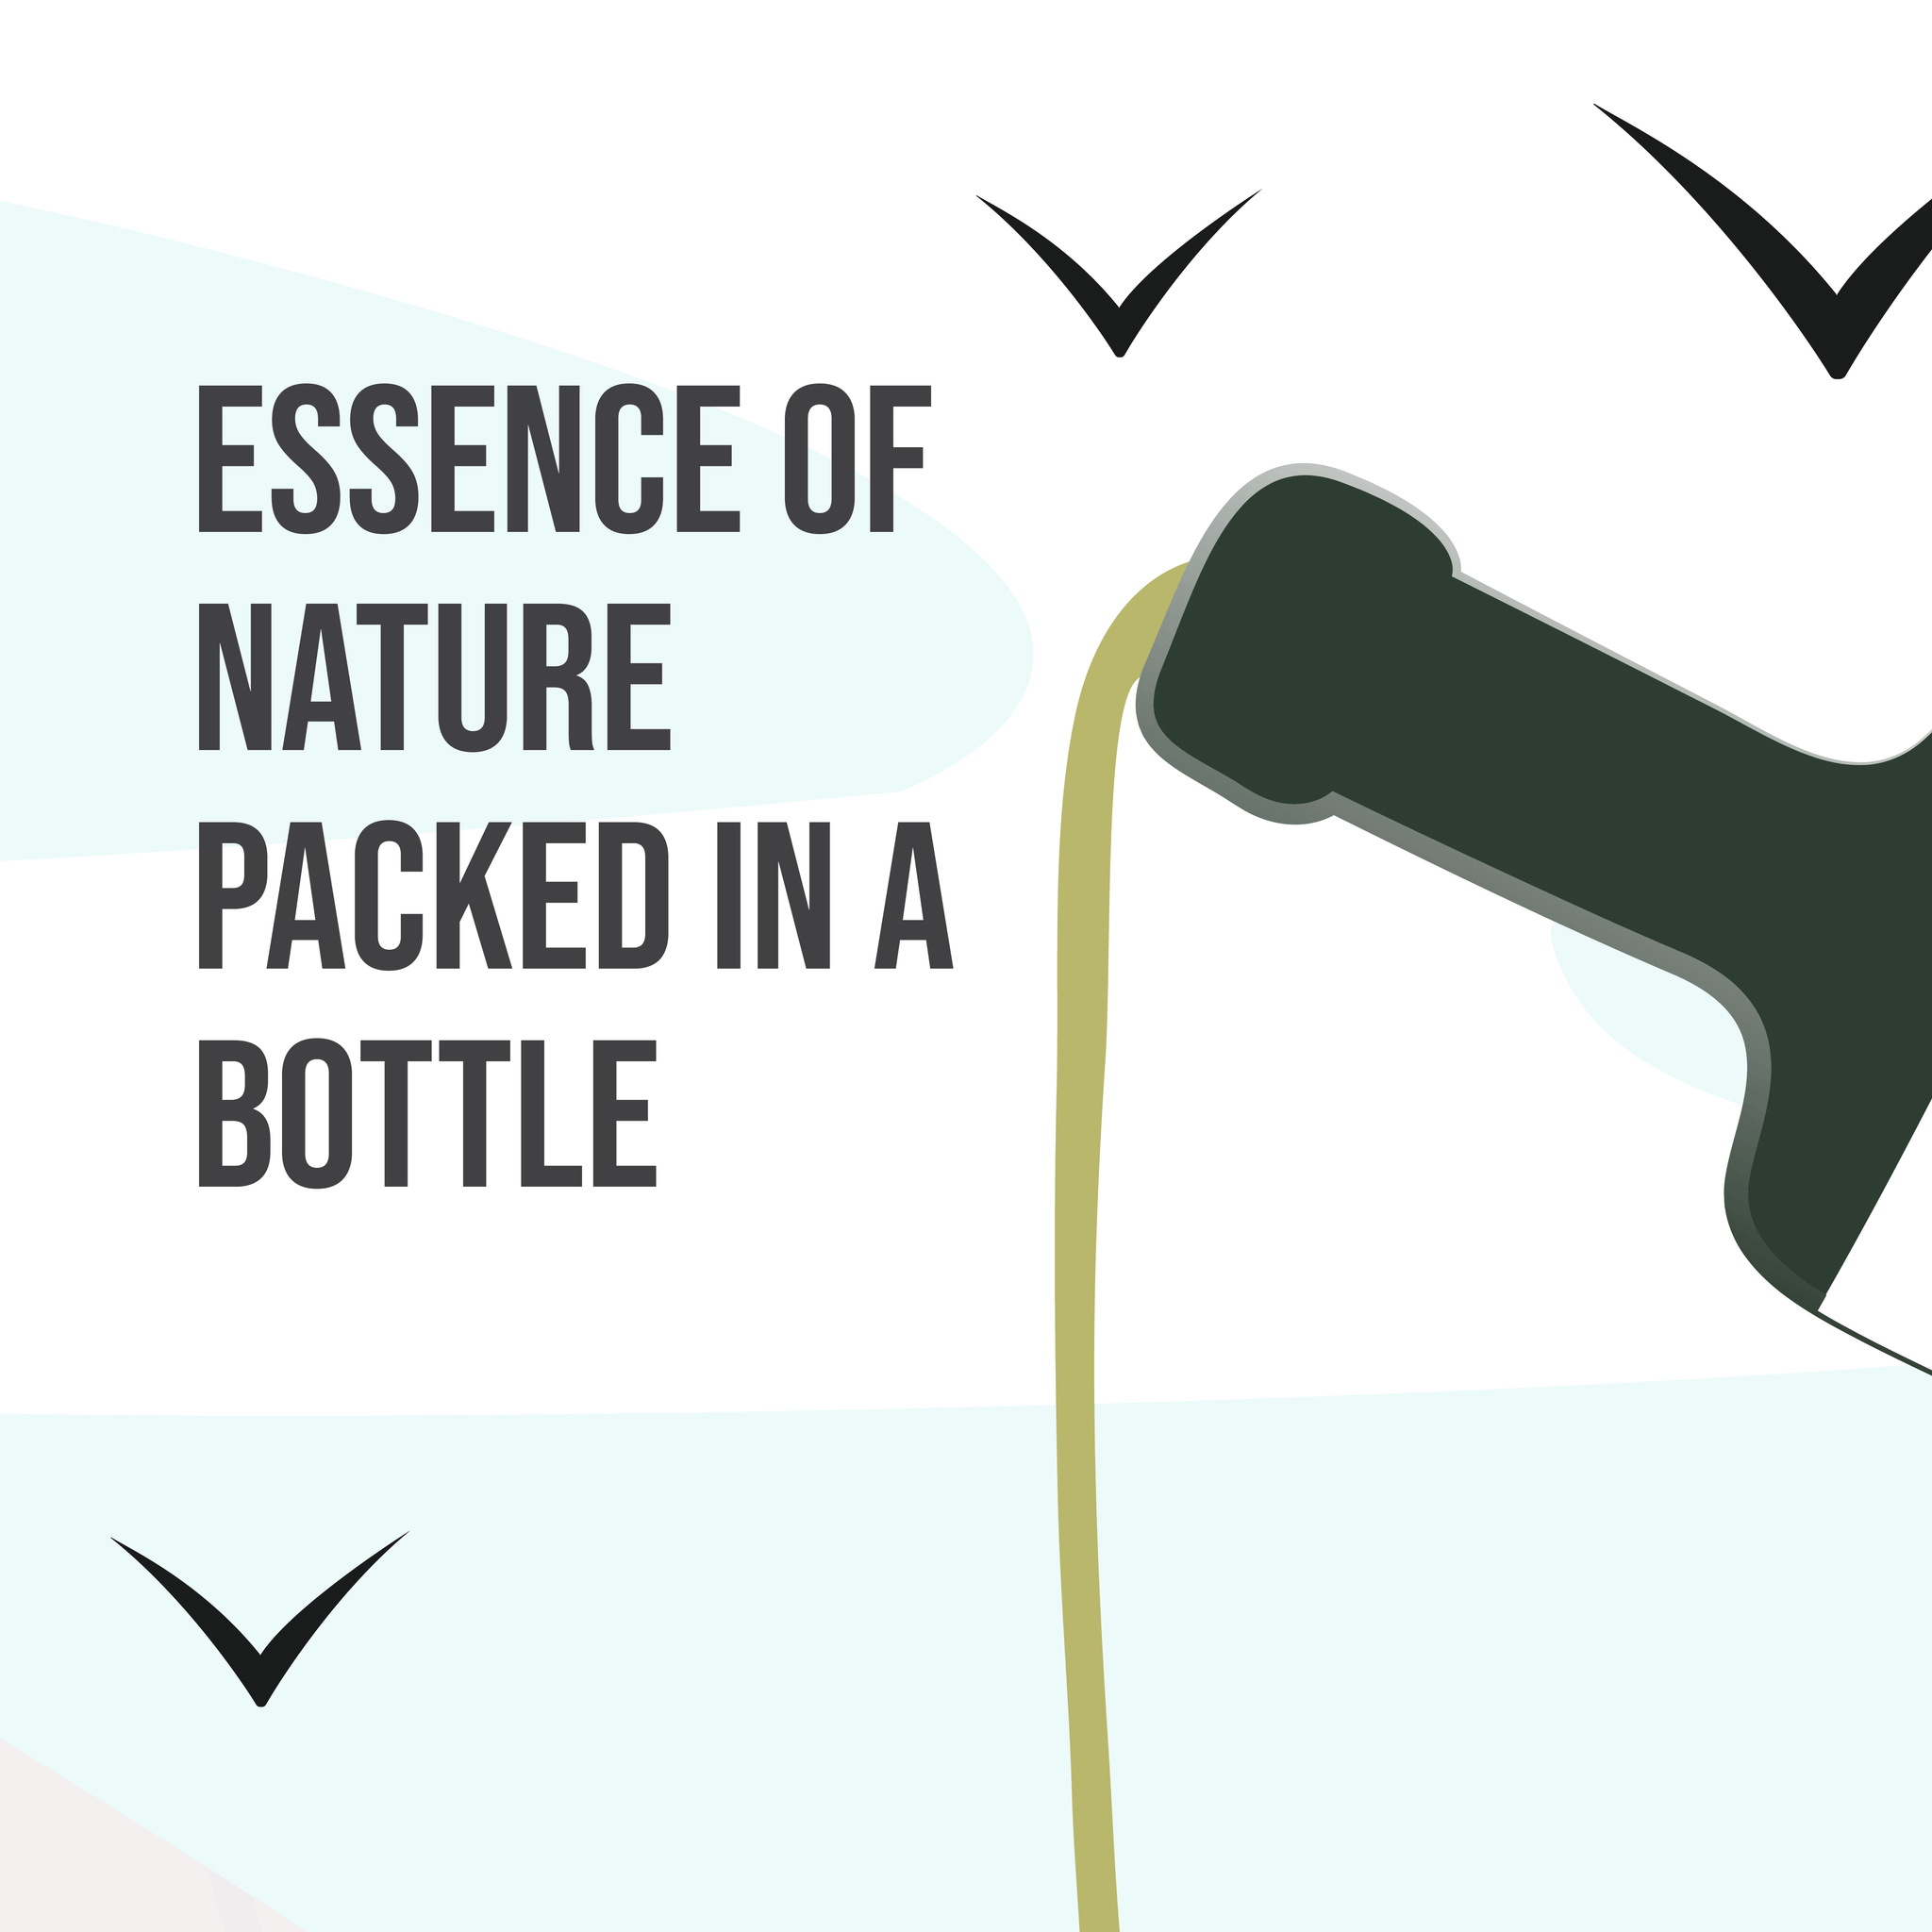 Essence of Nature in a bottle